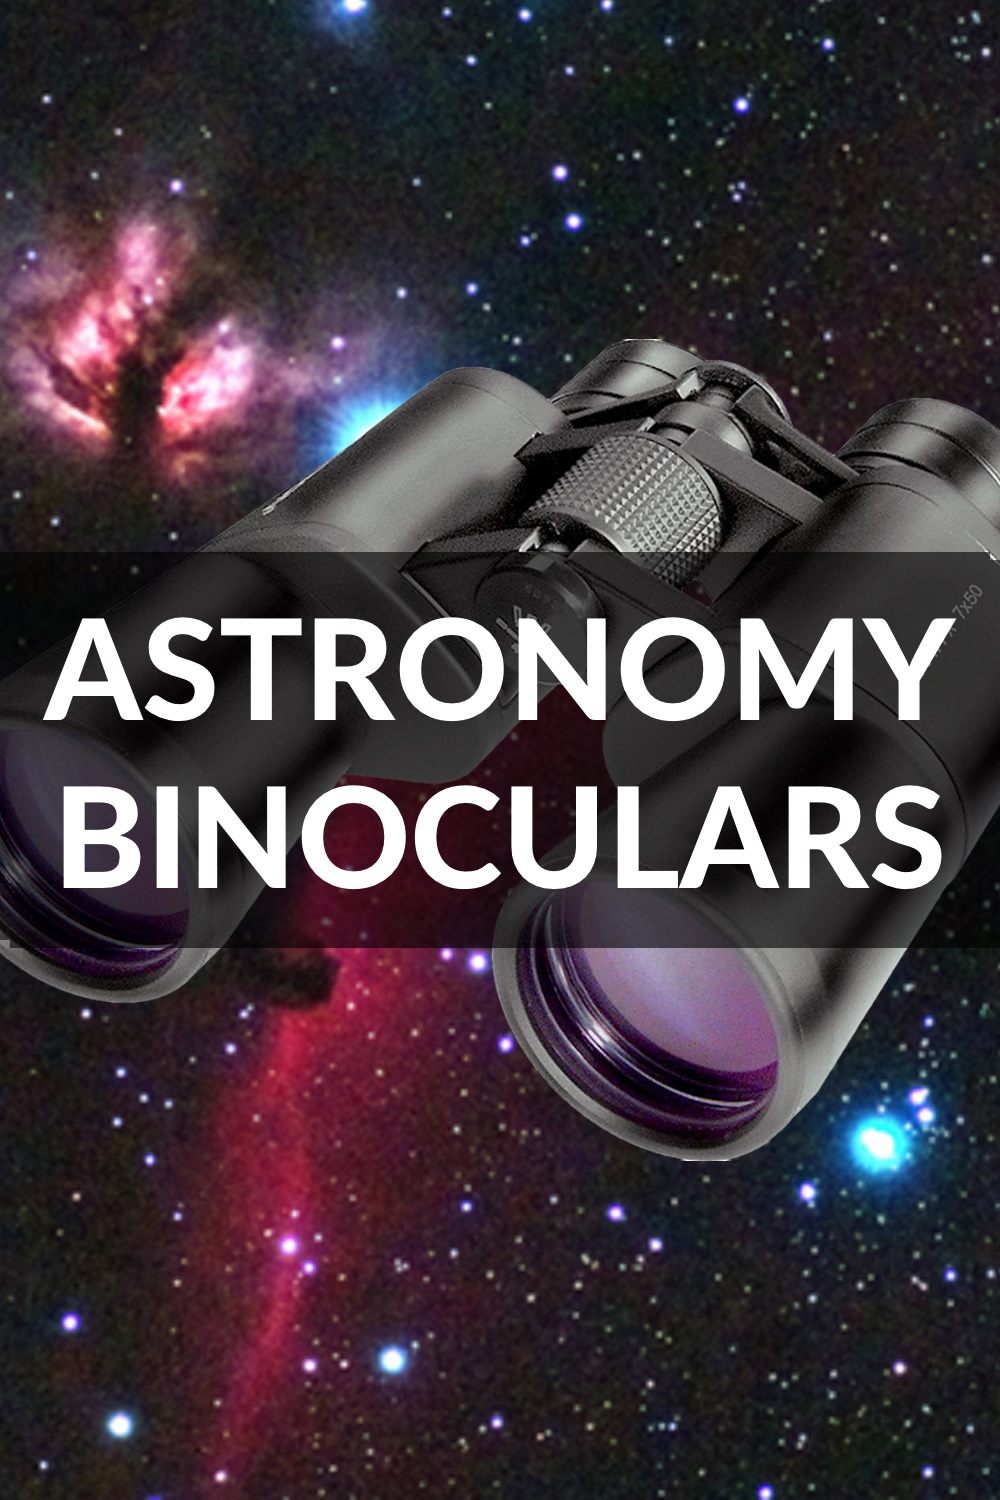 How to choose binoculars for astronomy?